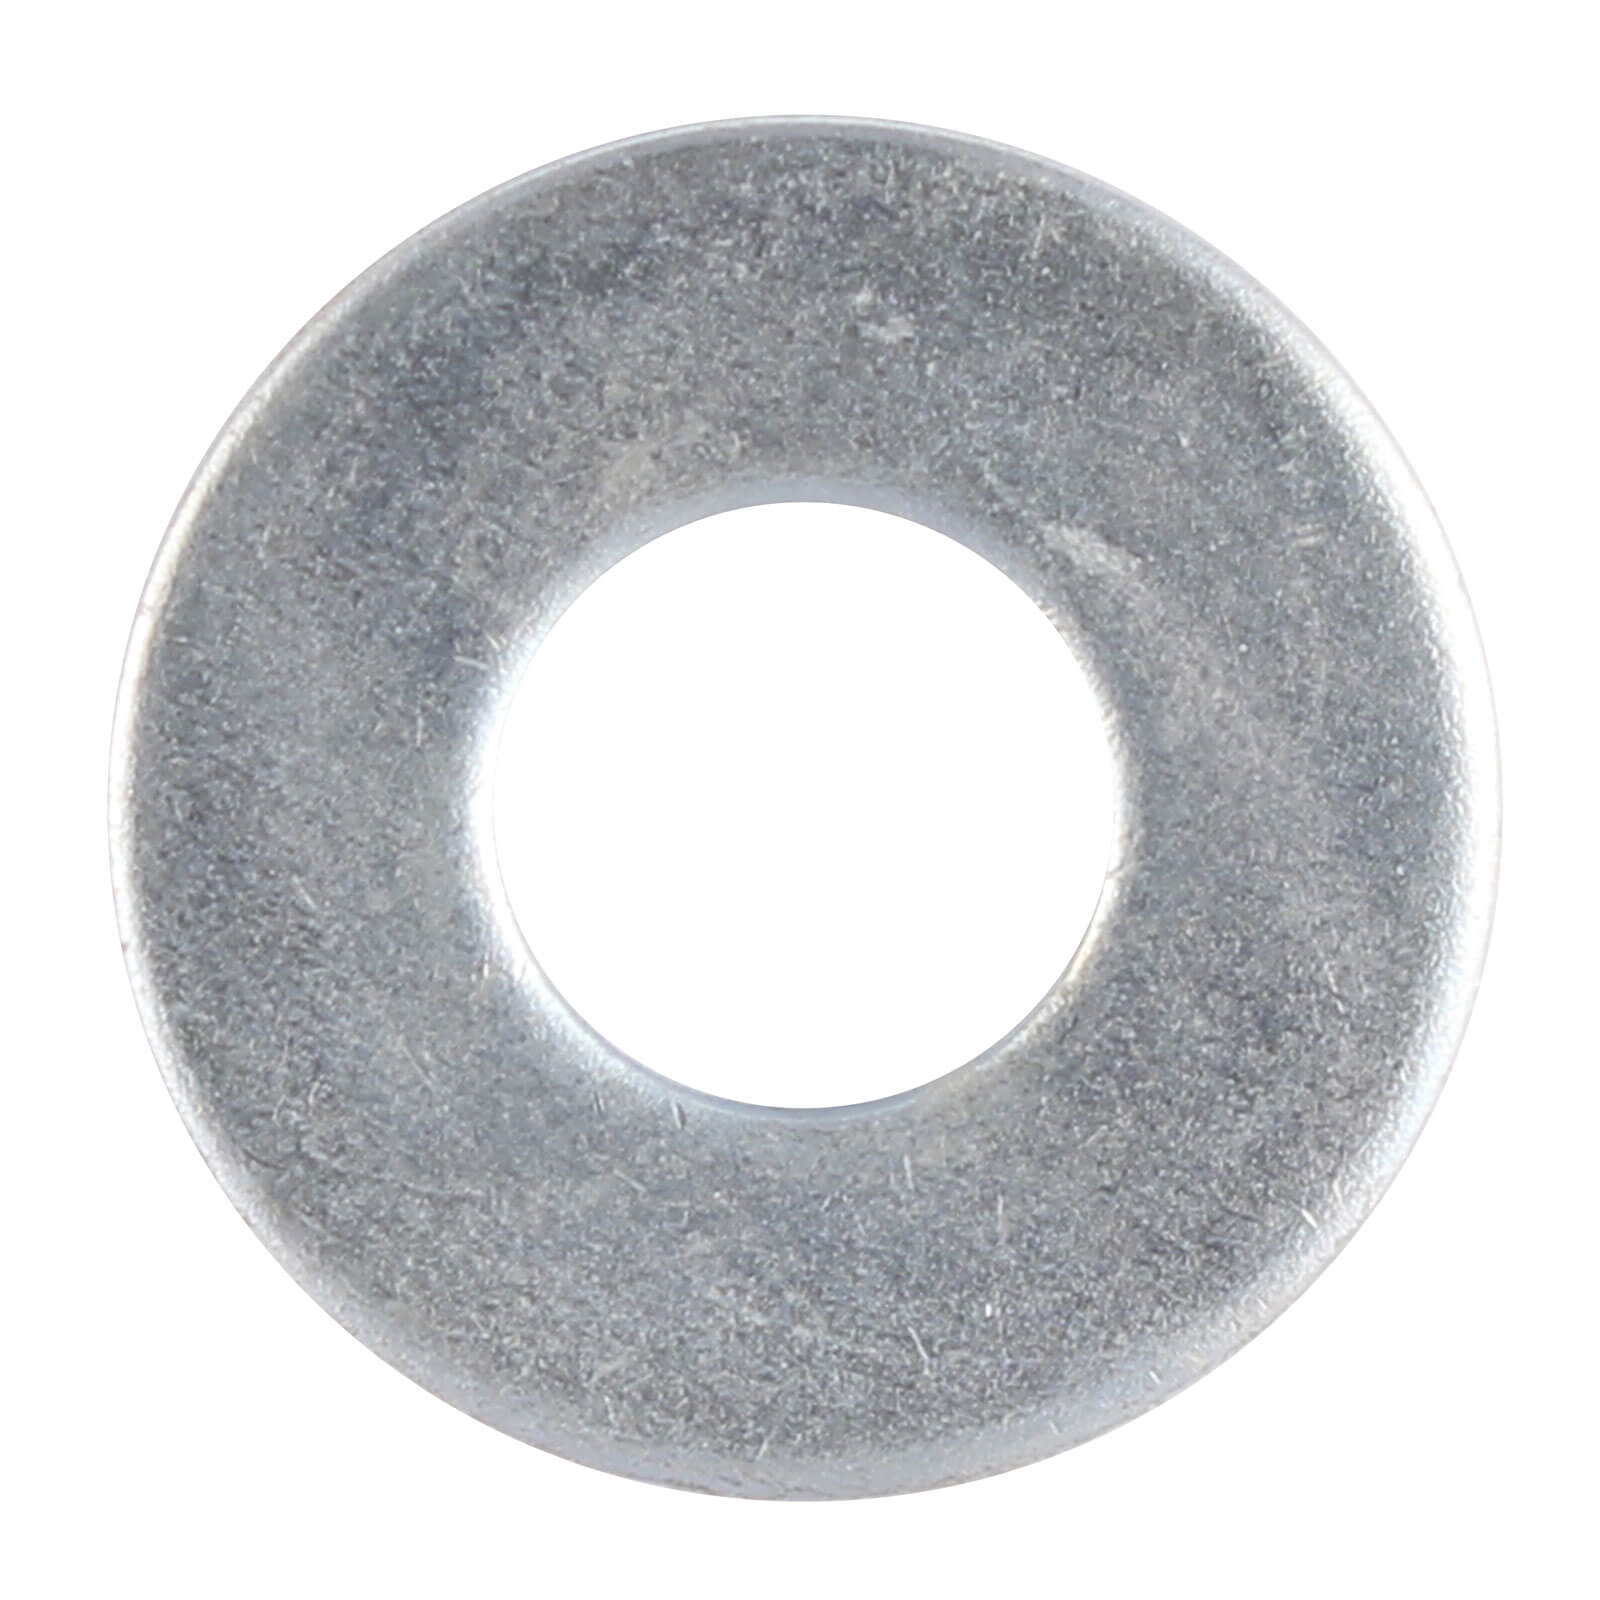 Photo of Washer Stainless Steel 8mm Pack Of 20